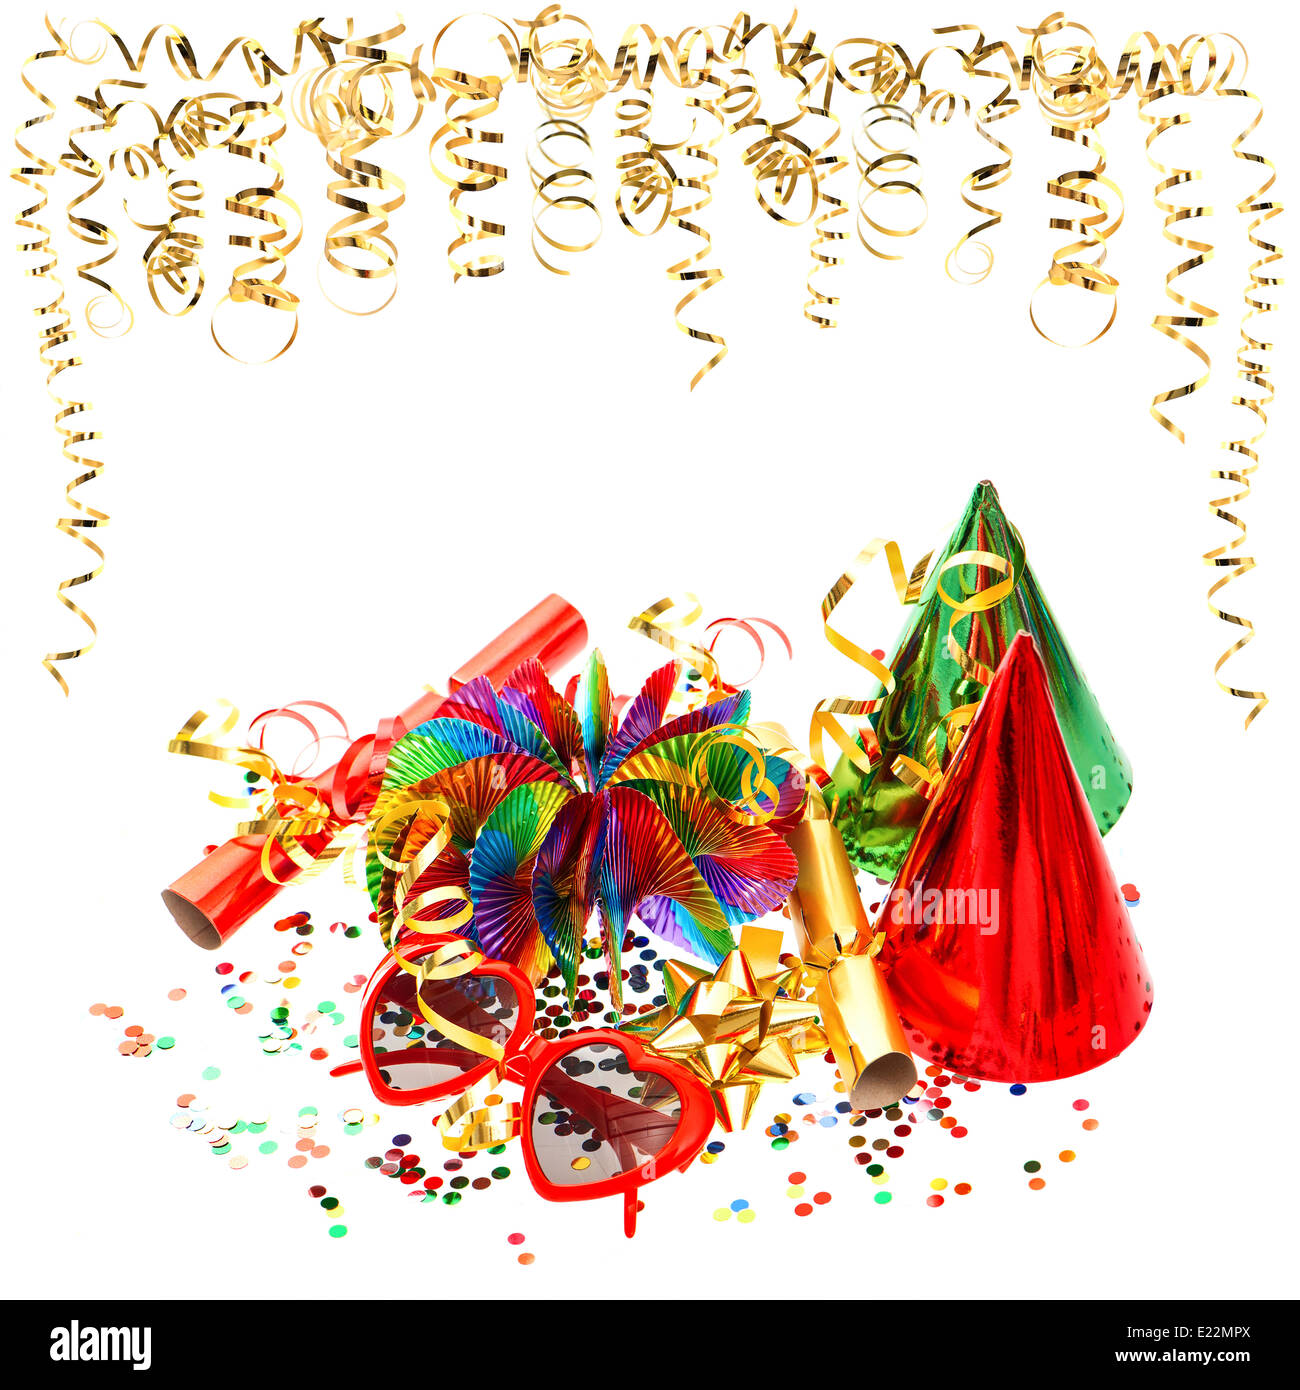 colorful garlands, streamer and confetti on white background. birthday or carnival party decoration Stock Photo